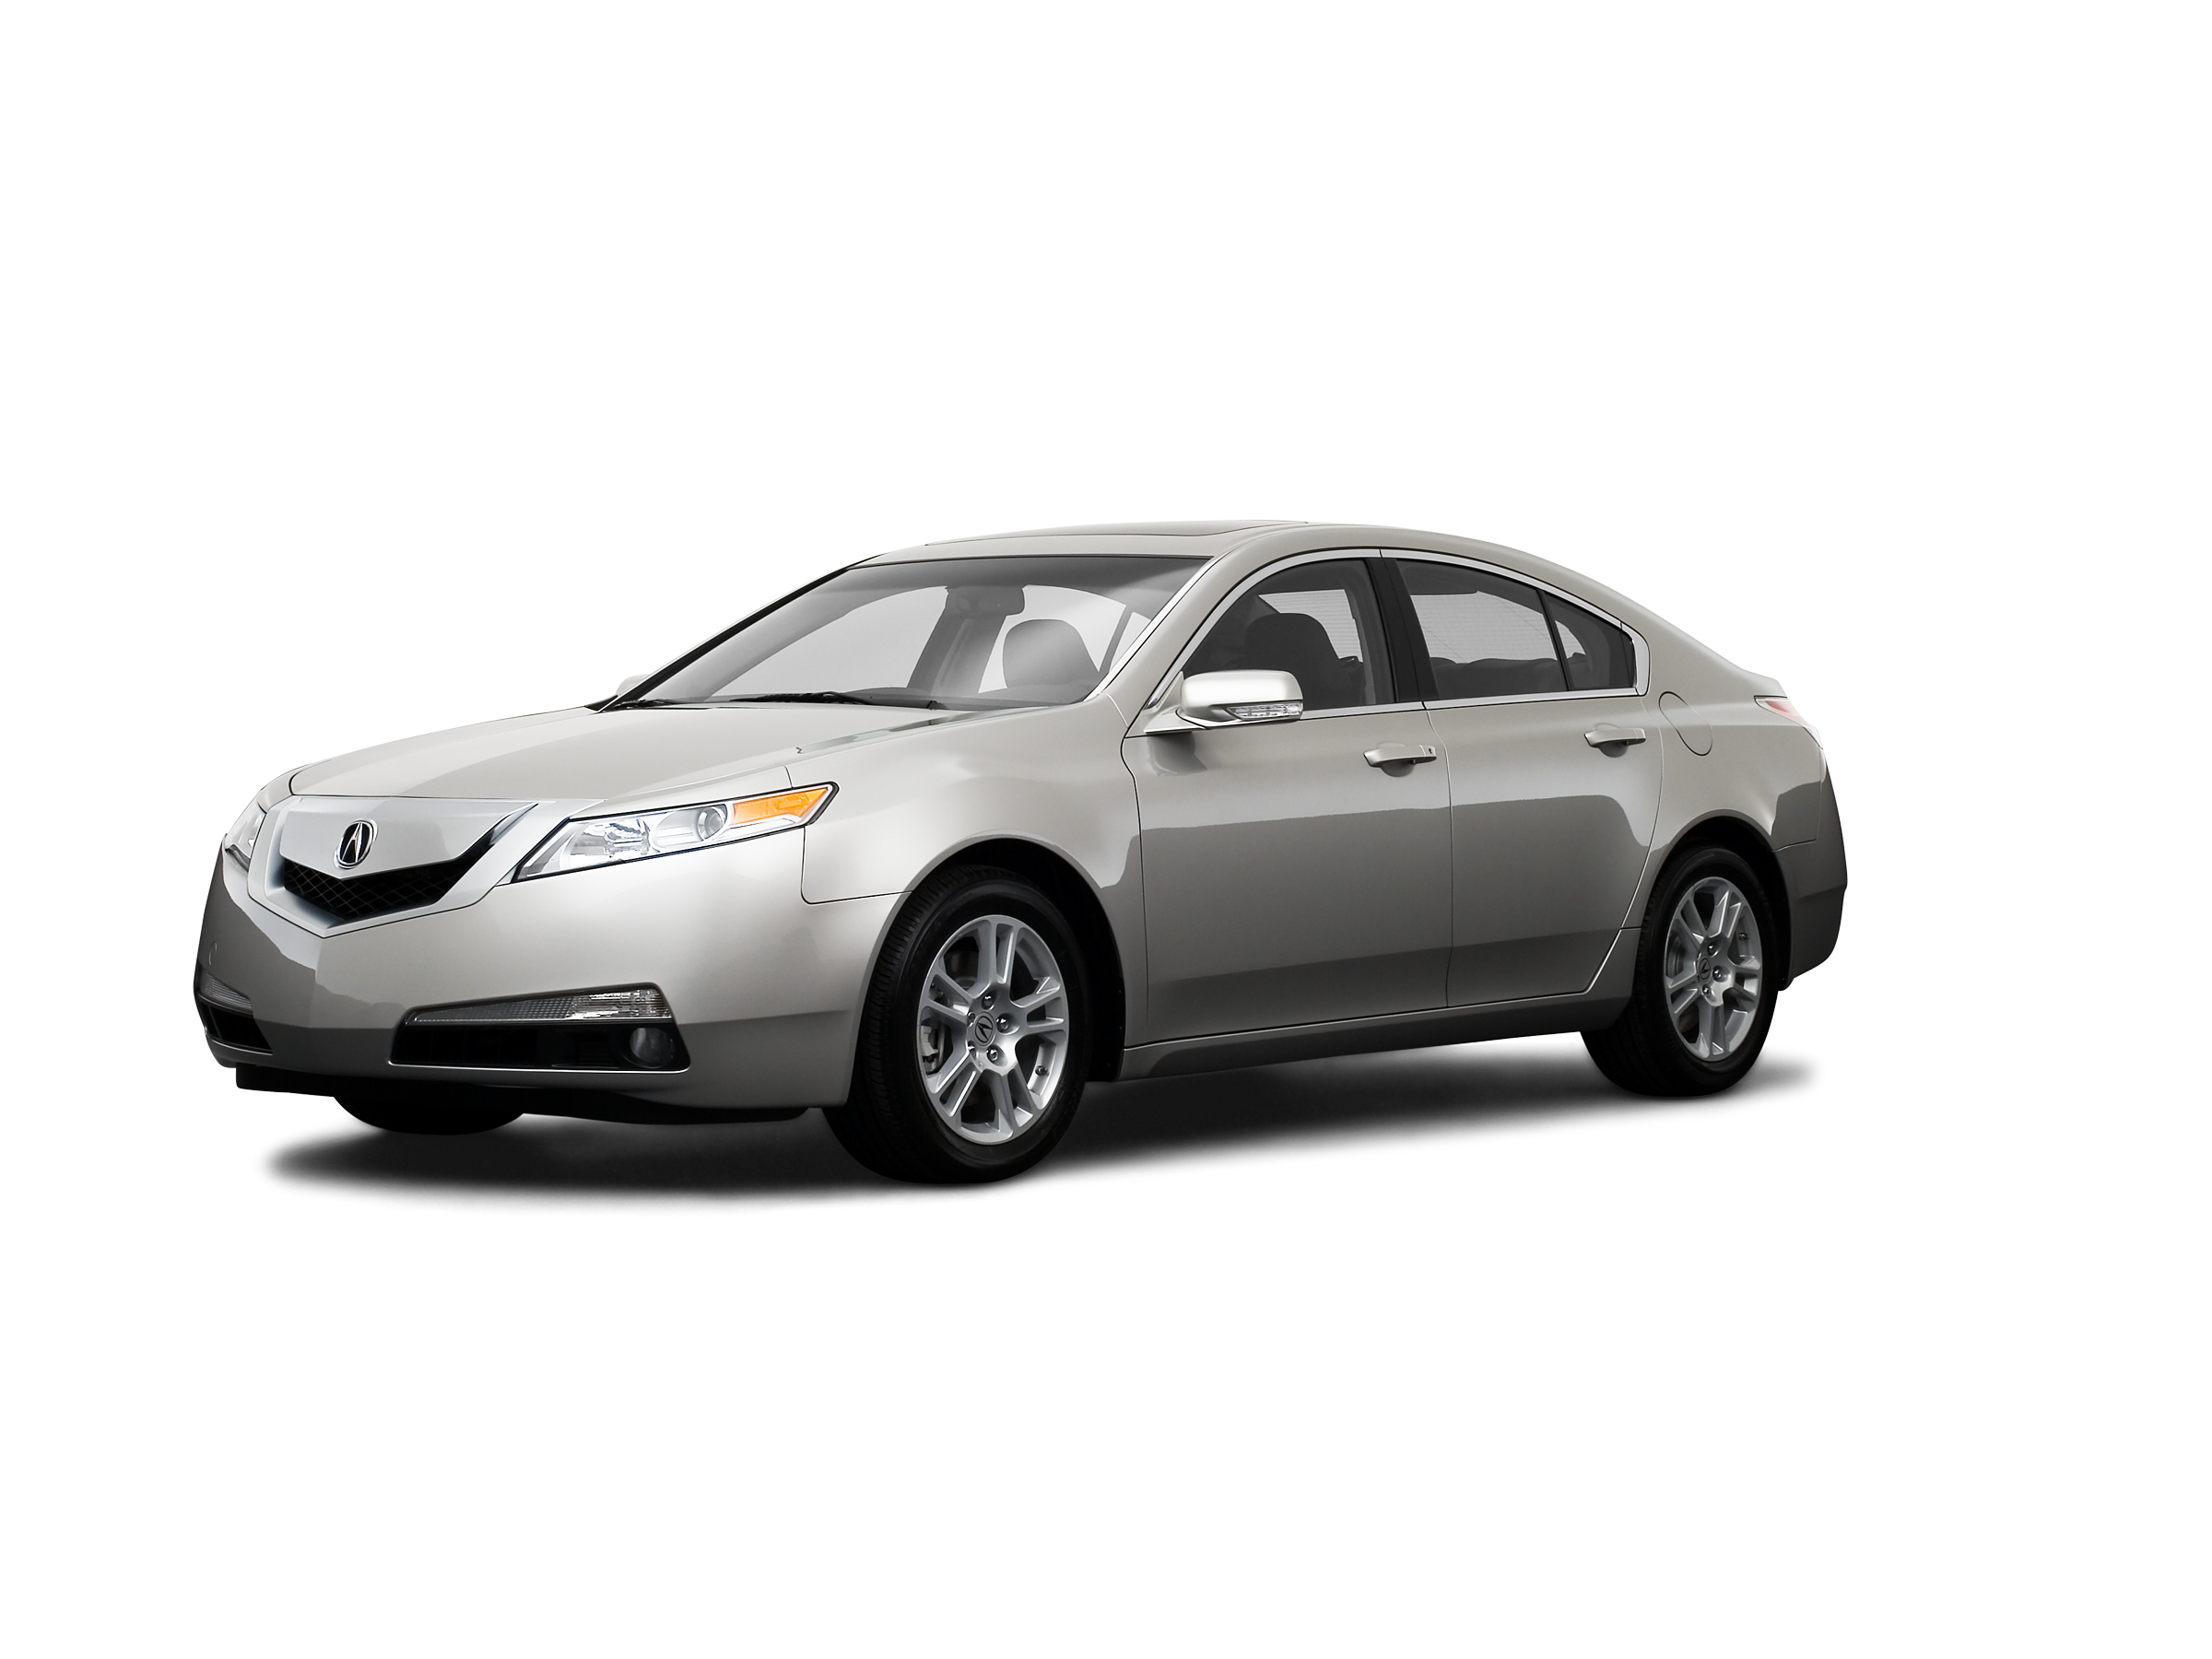 2009 Acura Tl Values And Cars For Sale Kelley Blue Book